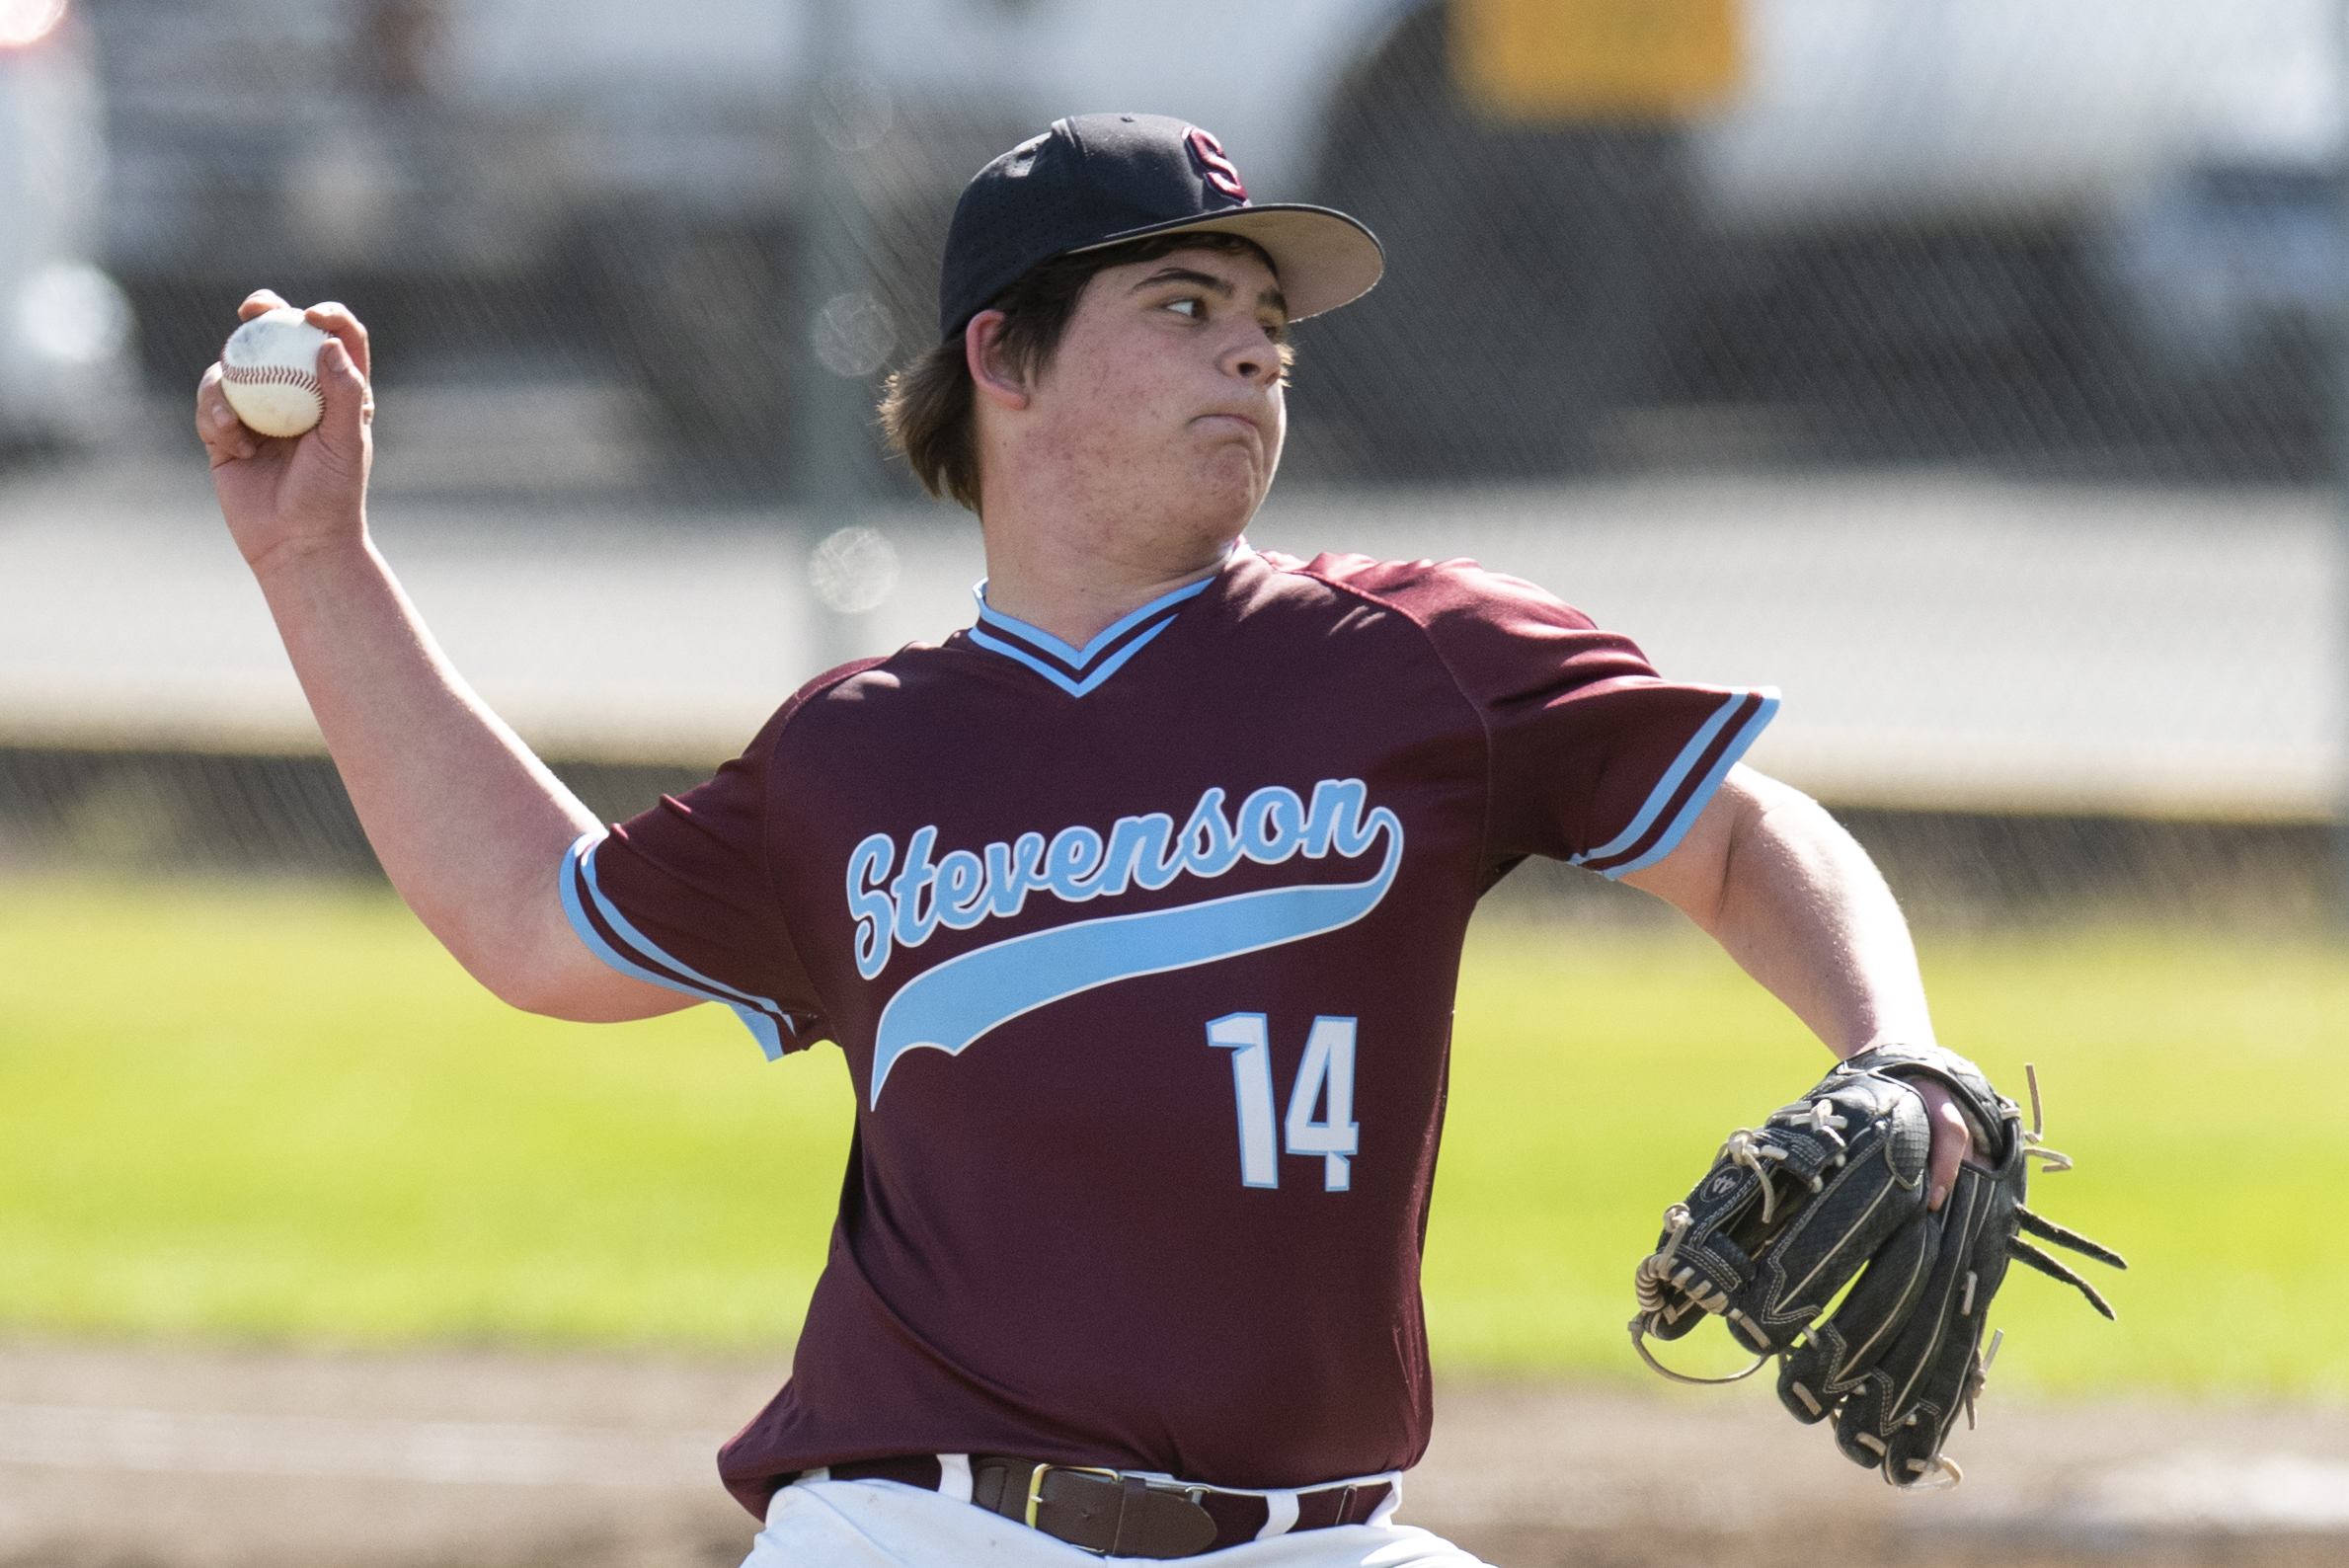 Stevenson's Max Jenkins (14) winds up to deliver a pitch during a road game against Onalaska on Friday, April 15.